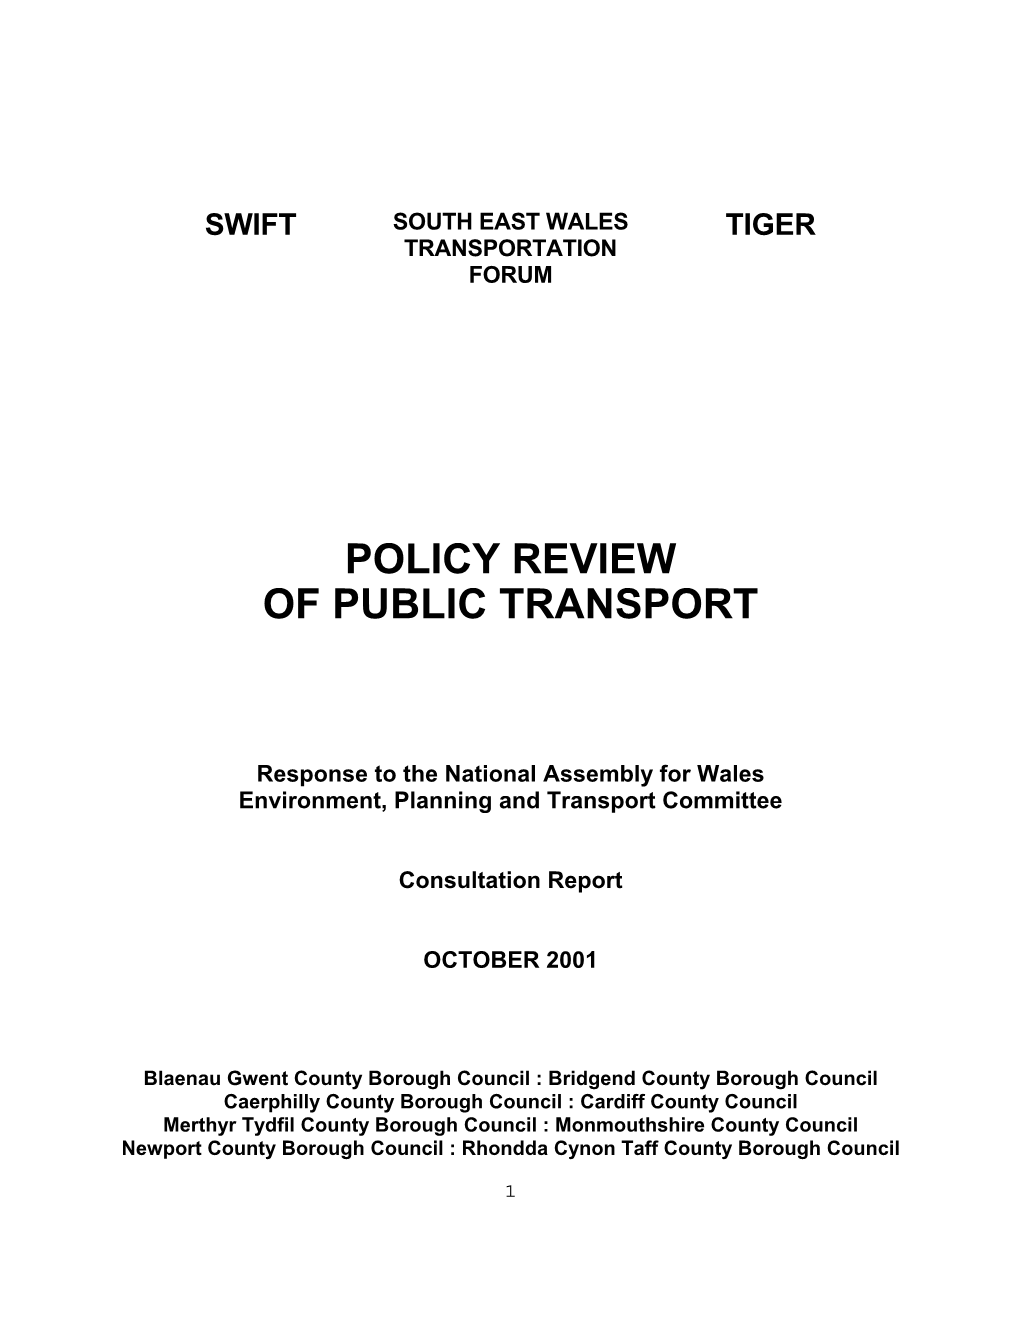 Tiger Policy Review of Public Transport